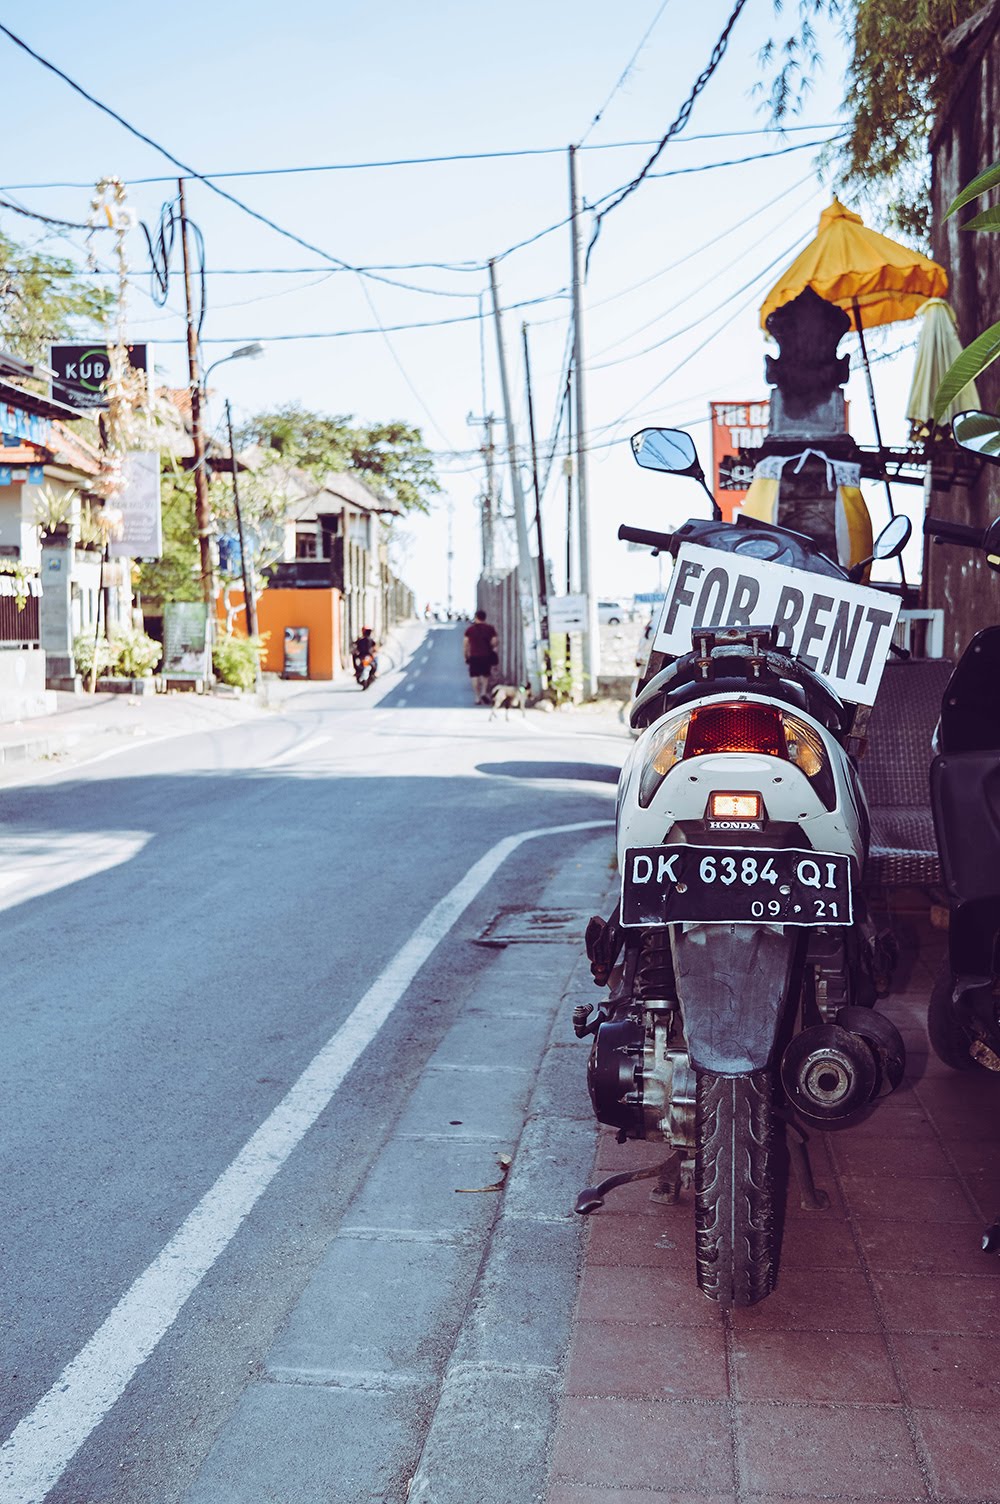 Motorcycle rental services in Bali